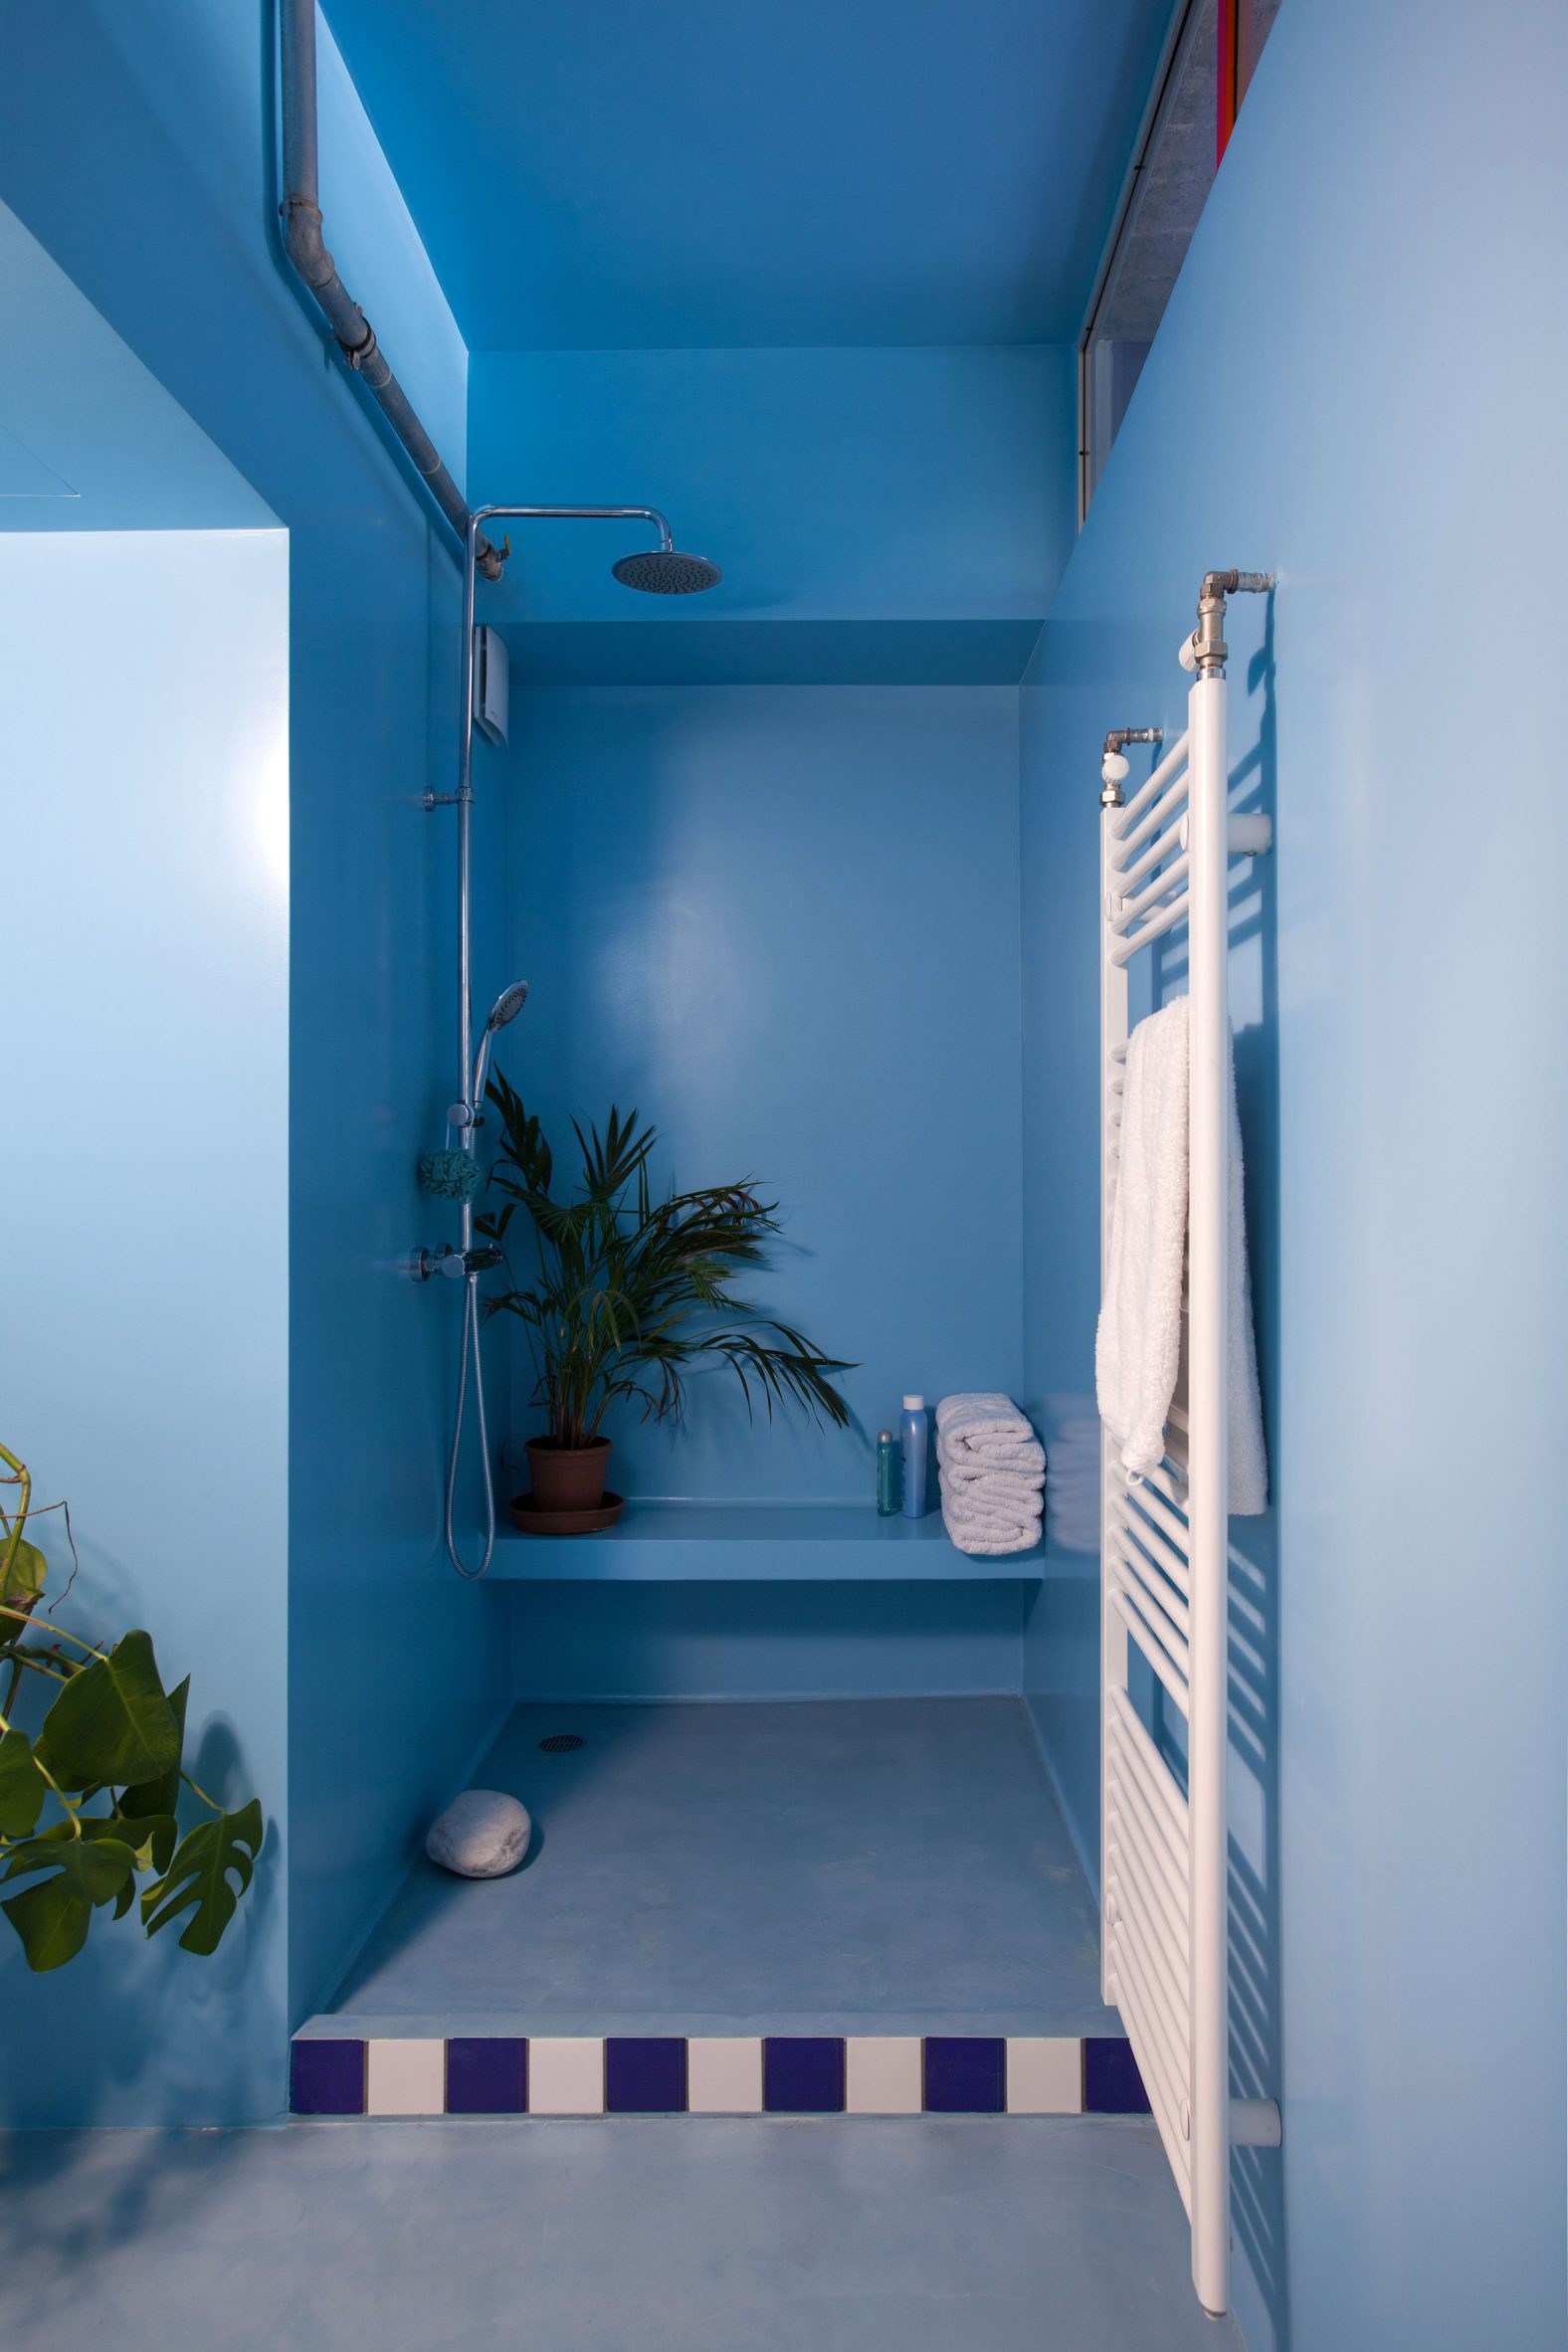 Point Supreme added blue accents to the bathroom